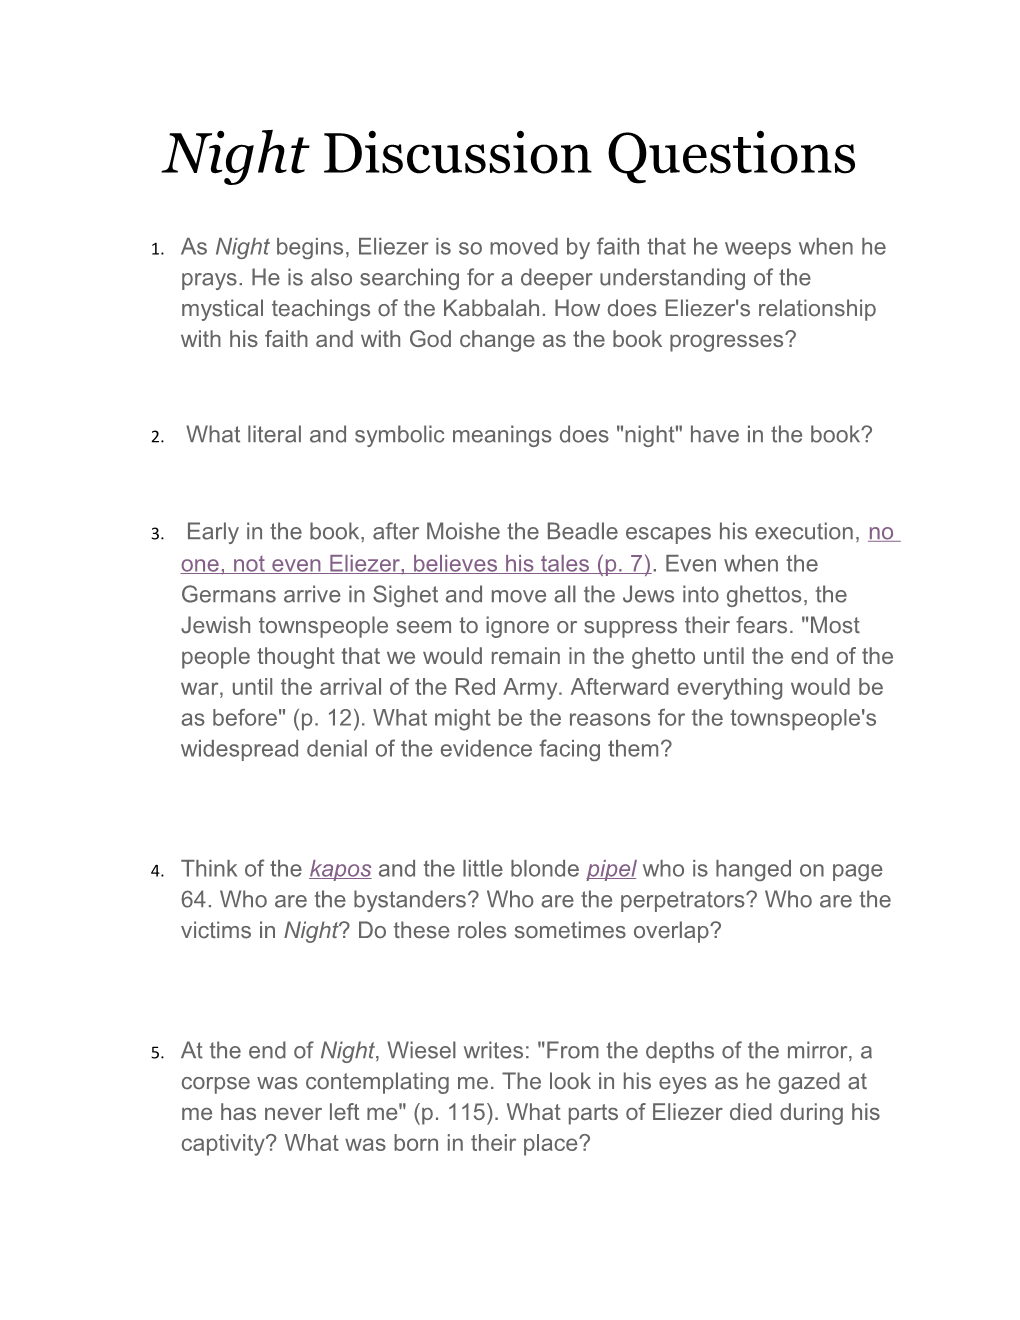 Night Discussion Questions